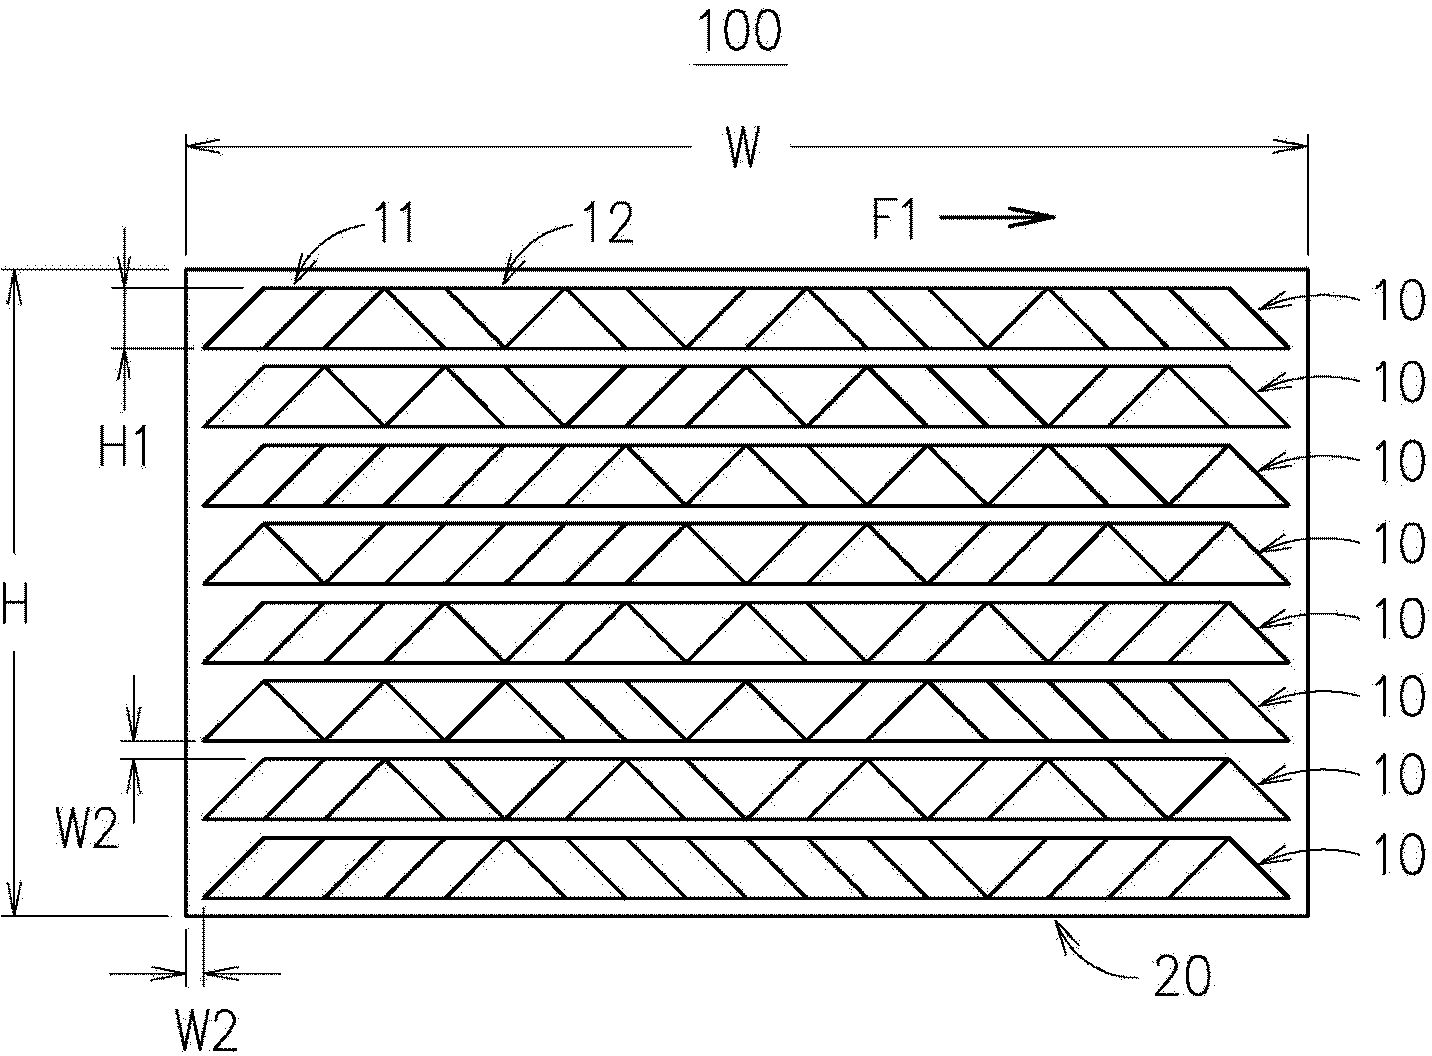 Barcode structure and barcode encoding method